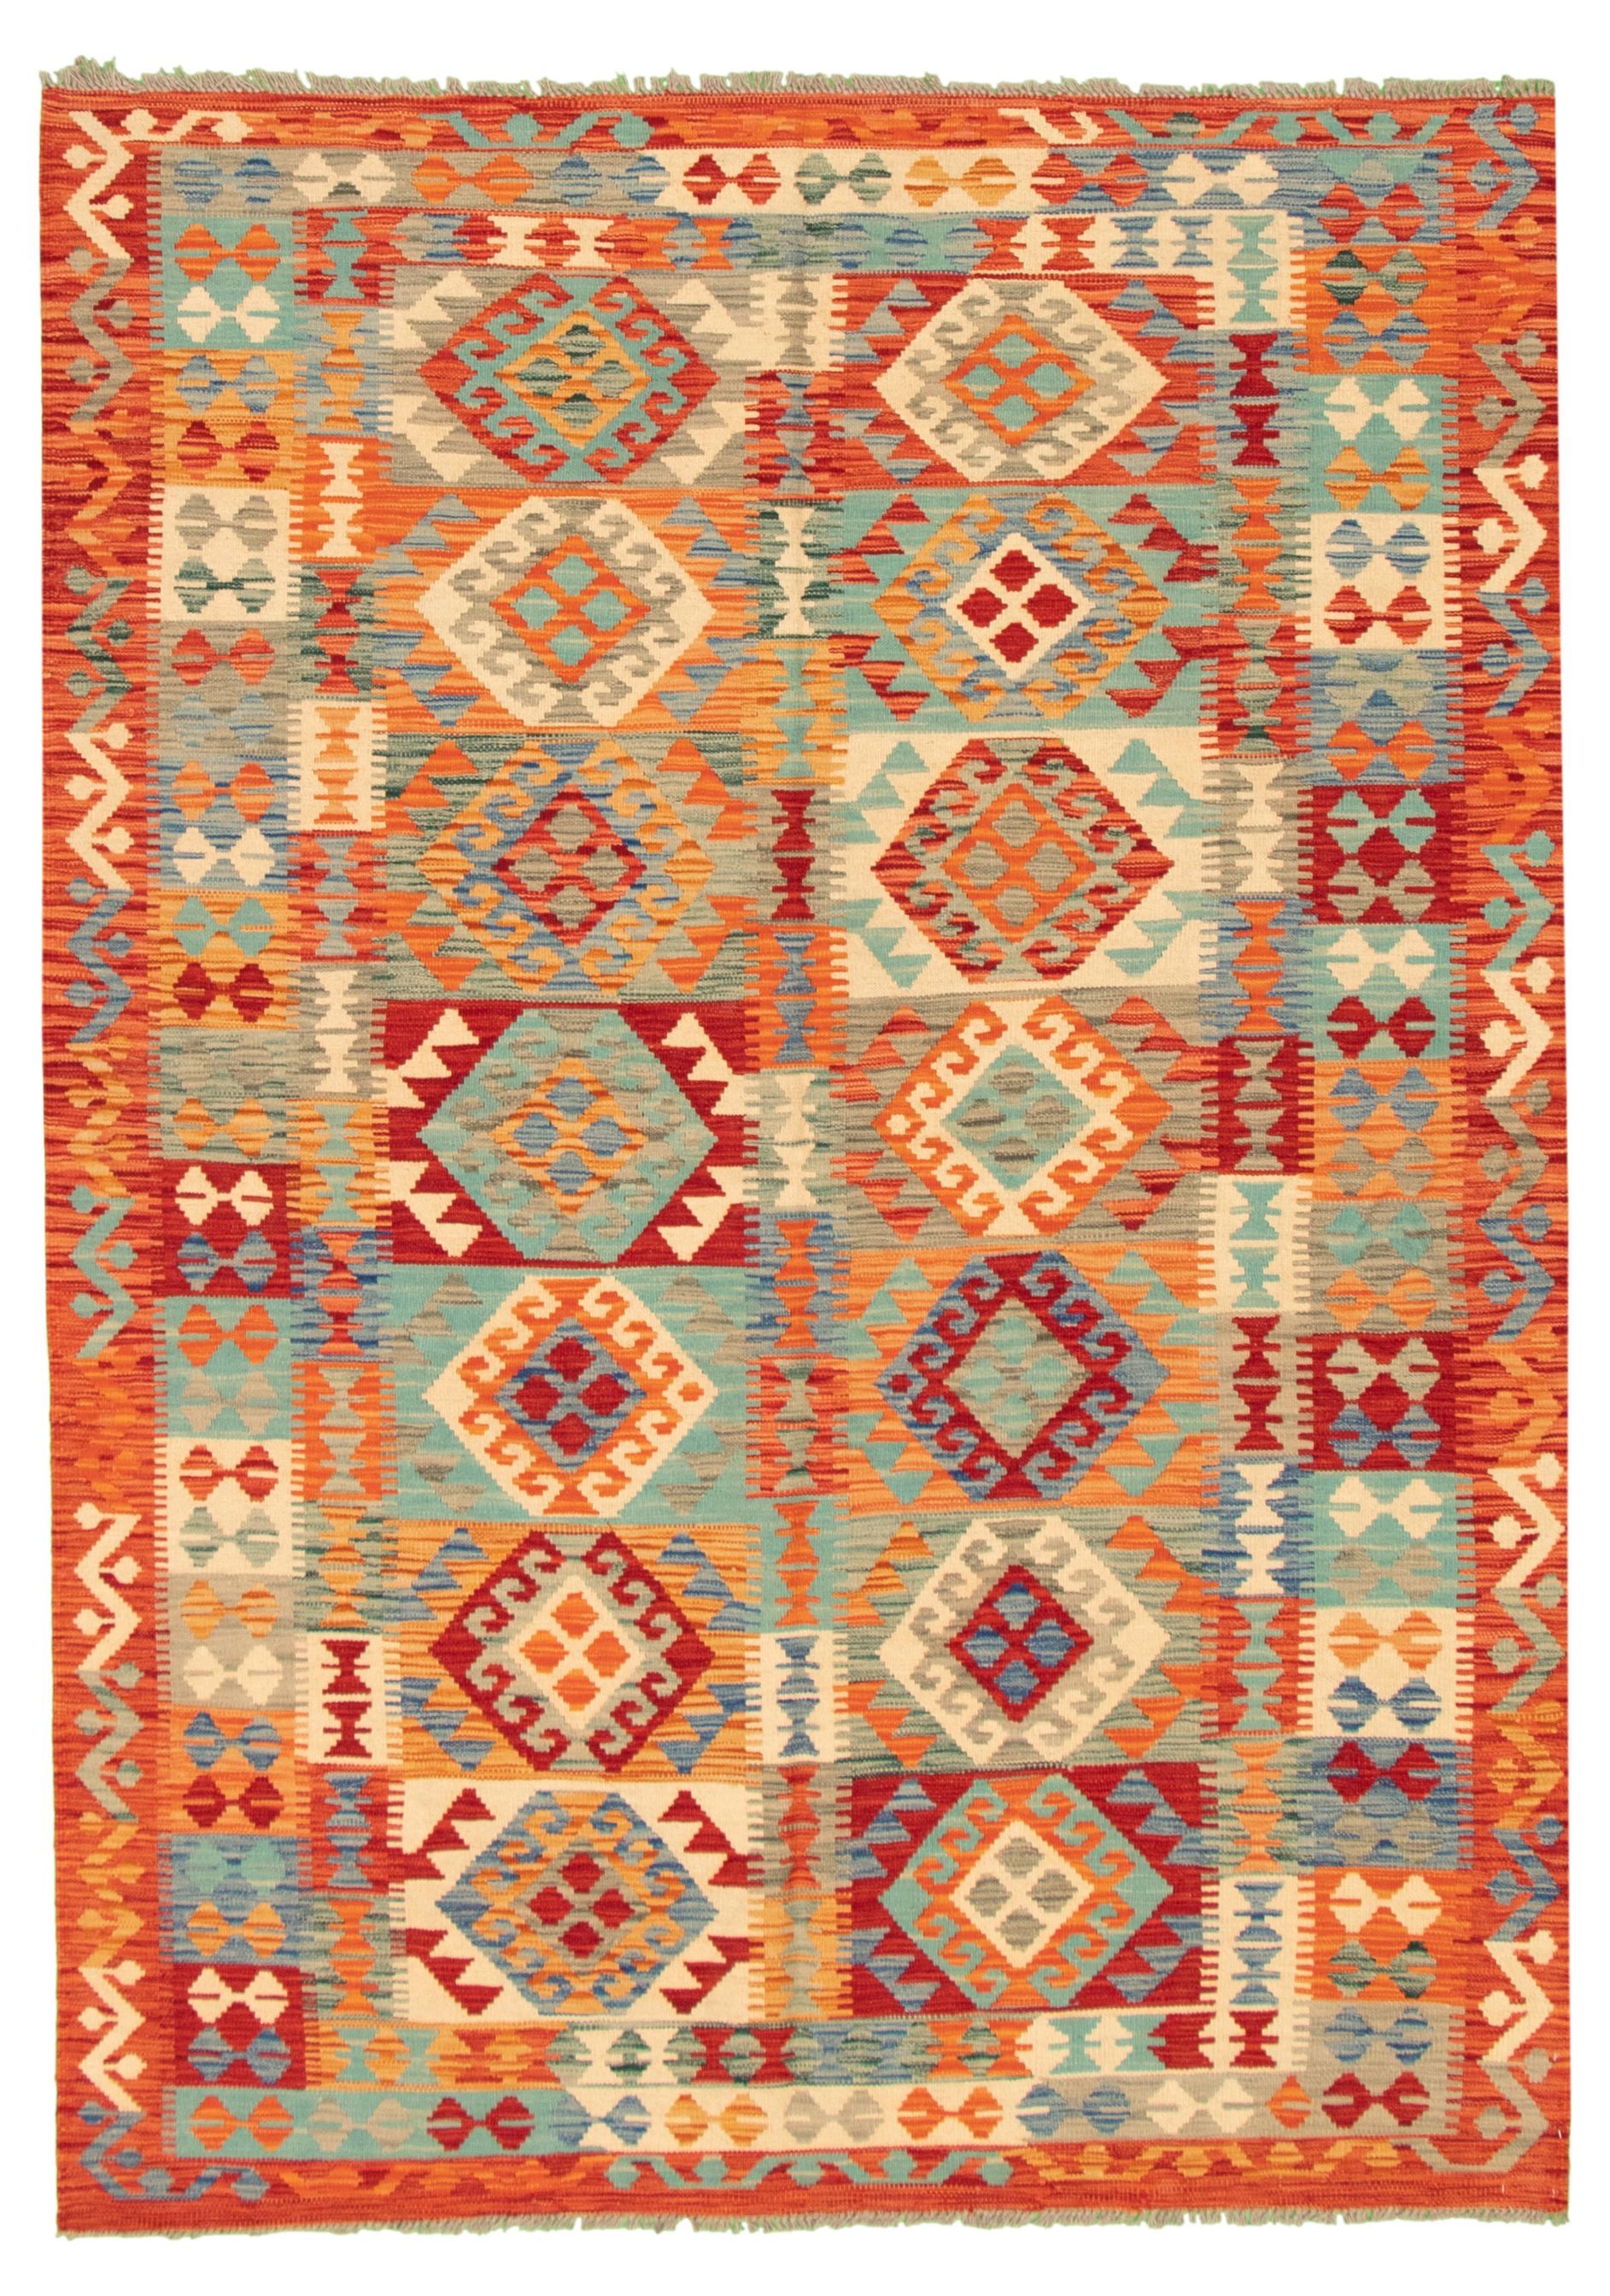 Hand woven Bold and Colorful  Copper, Dark Red Wool Kilim 5'10" x 8'0" Size: 5'10" x 8'0"  